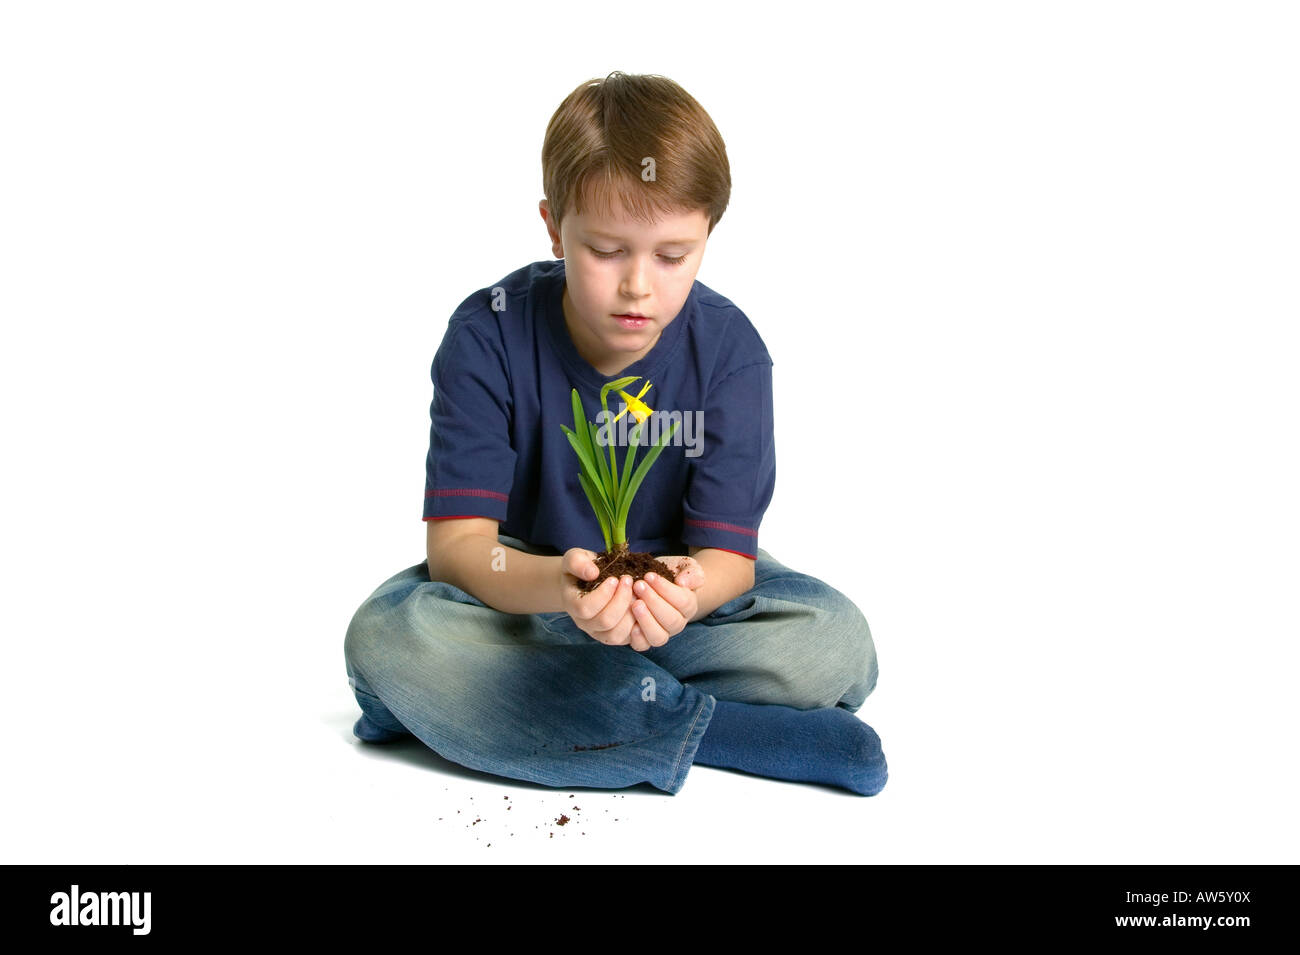 A young boy sat crossed legs holding a new daffodil in his hands shot against a white background Stock Photo